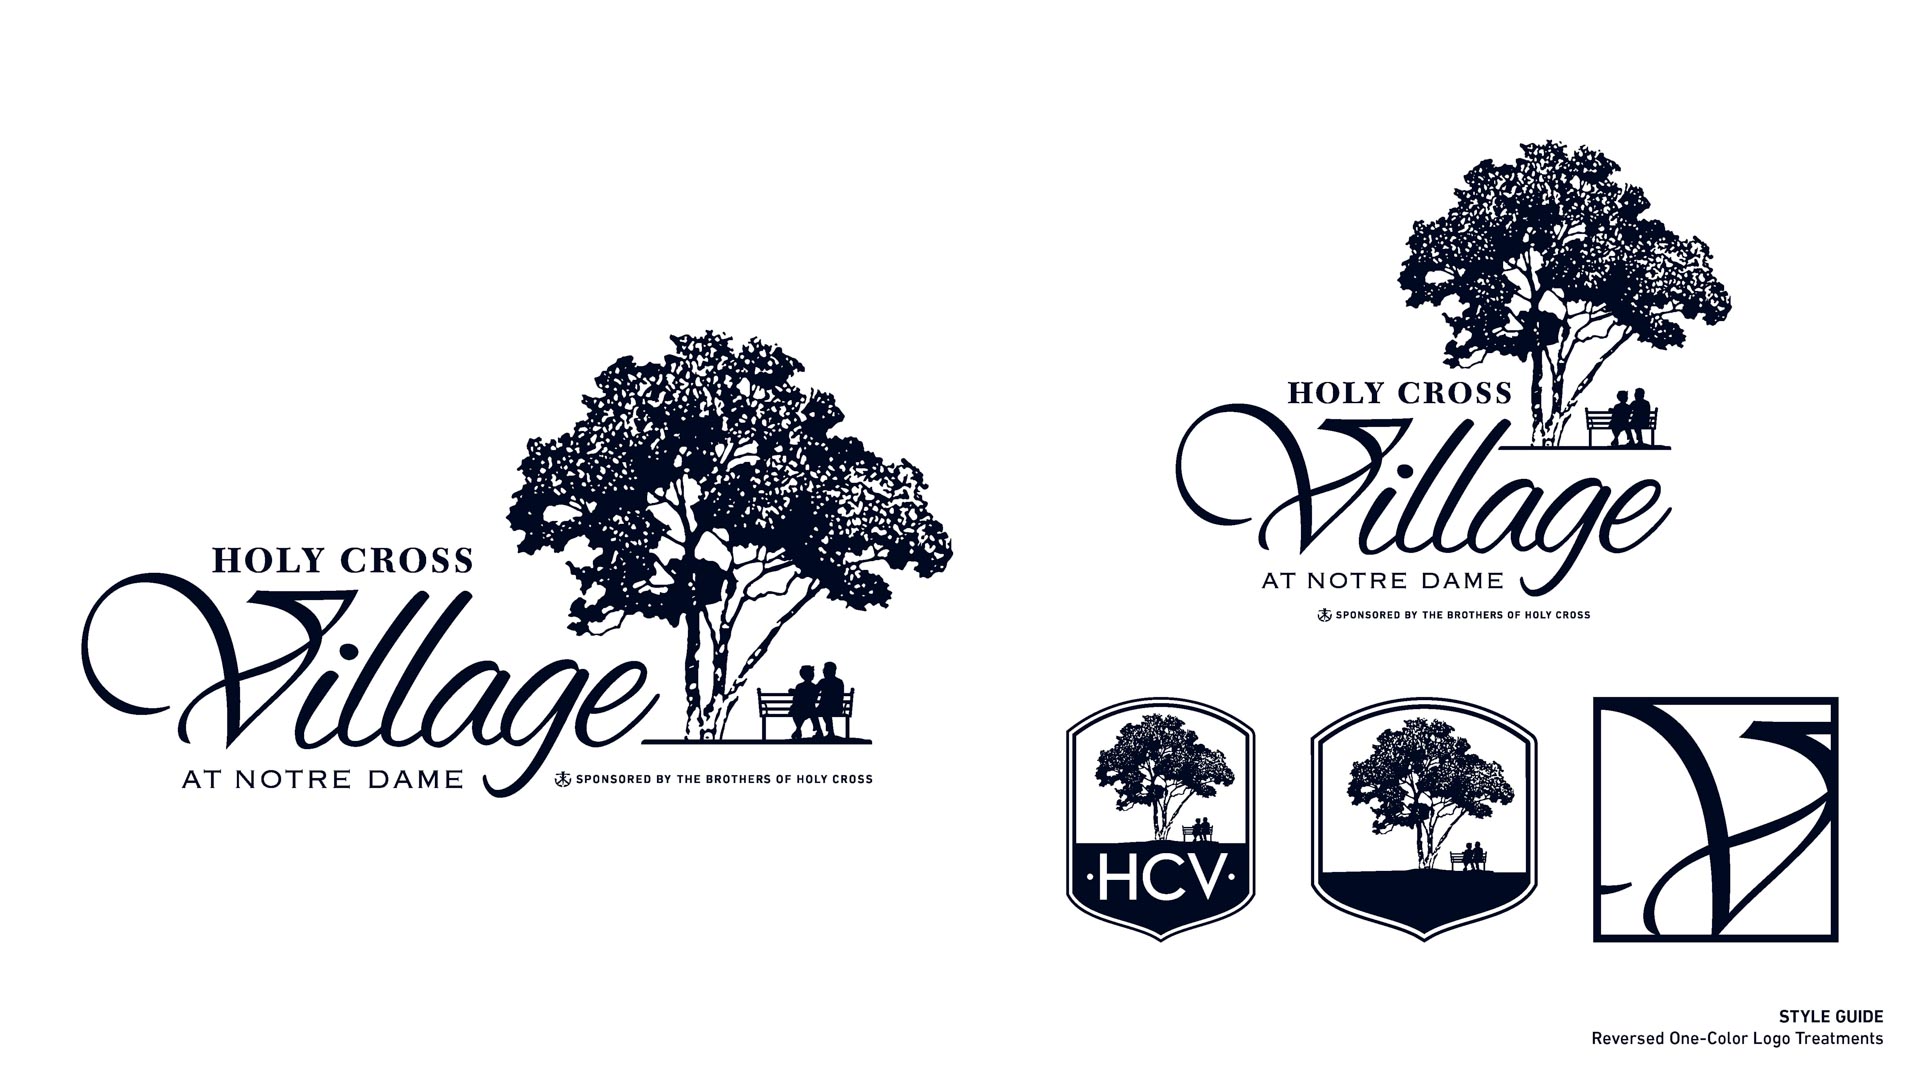 Holy Cross Village's Reversed One Color Logo Treatments